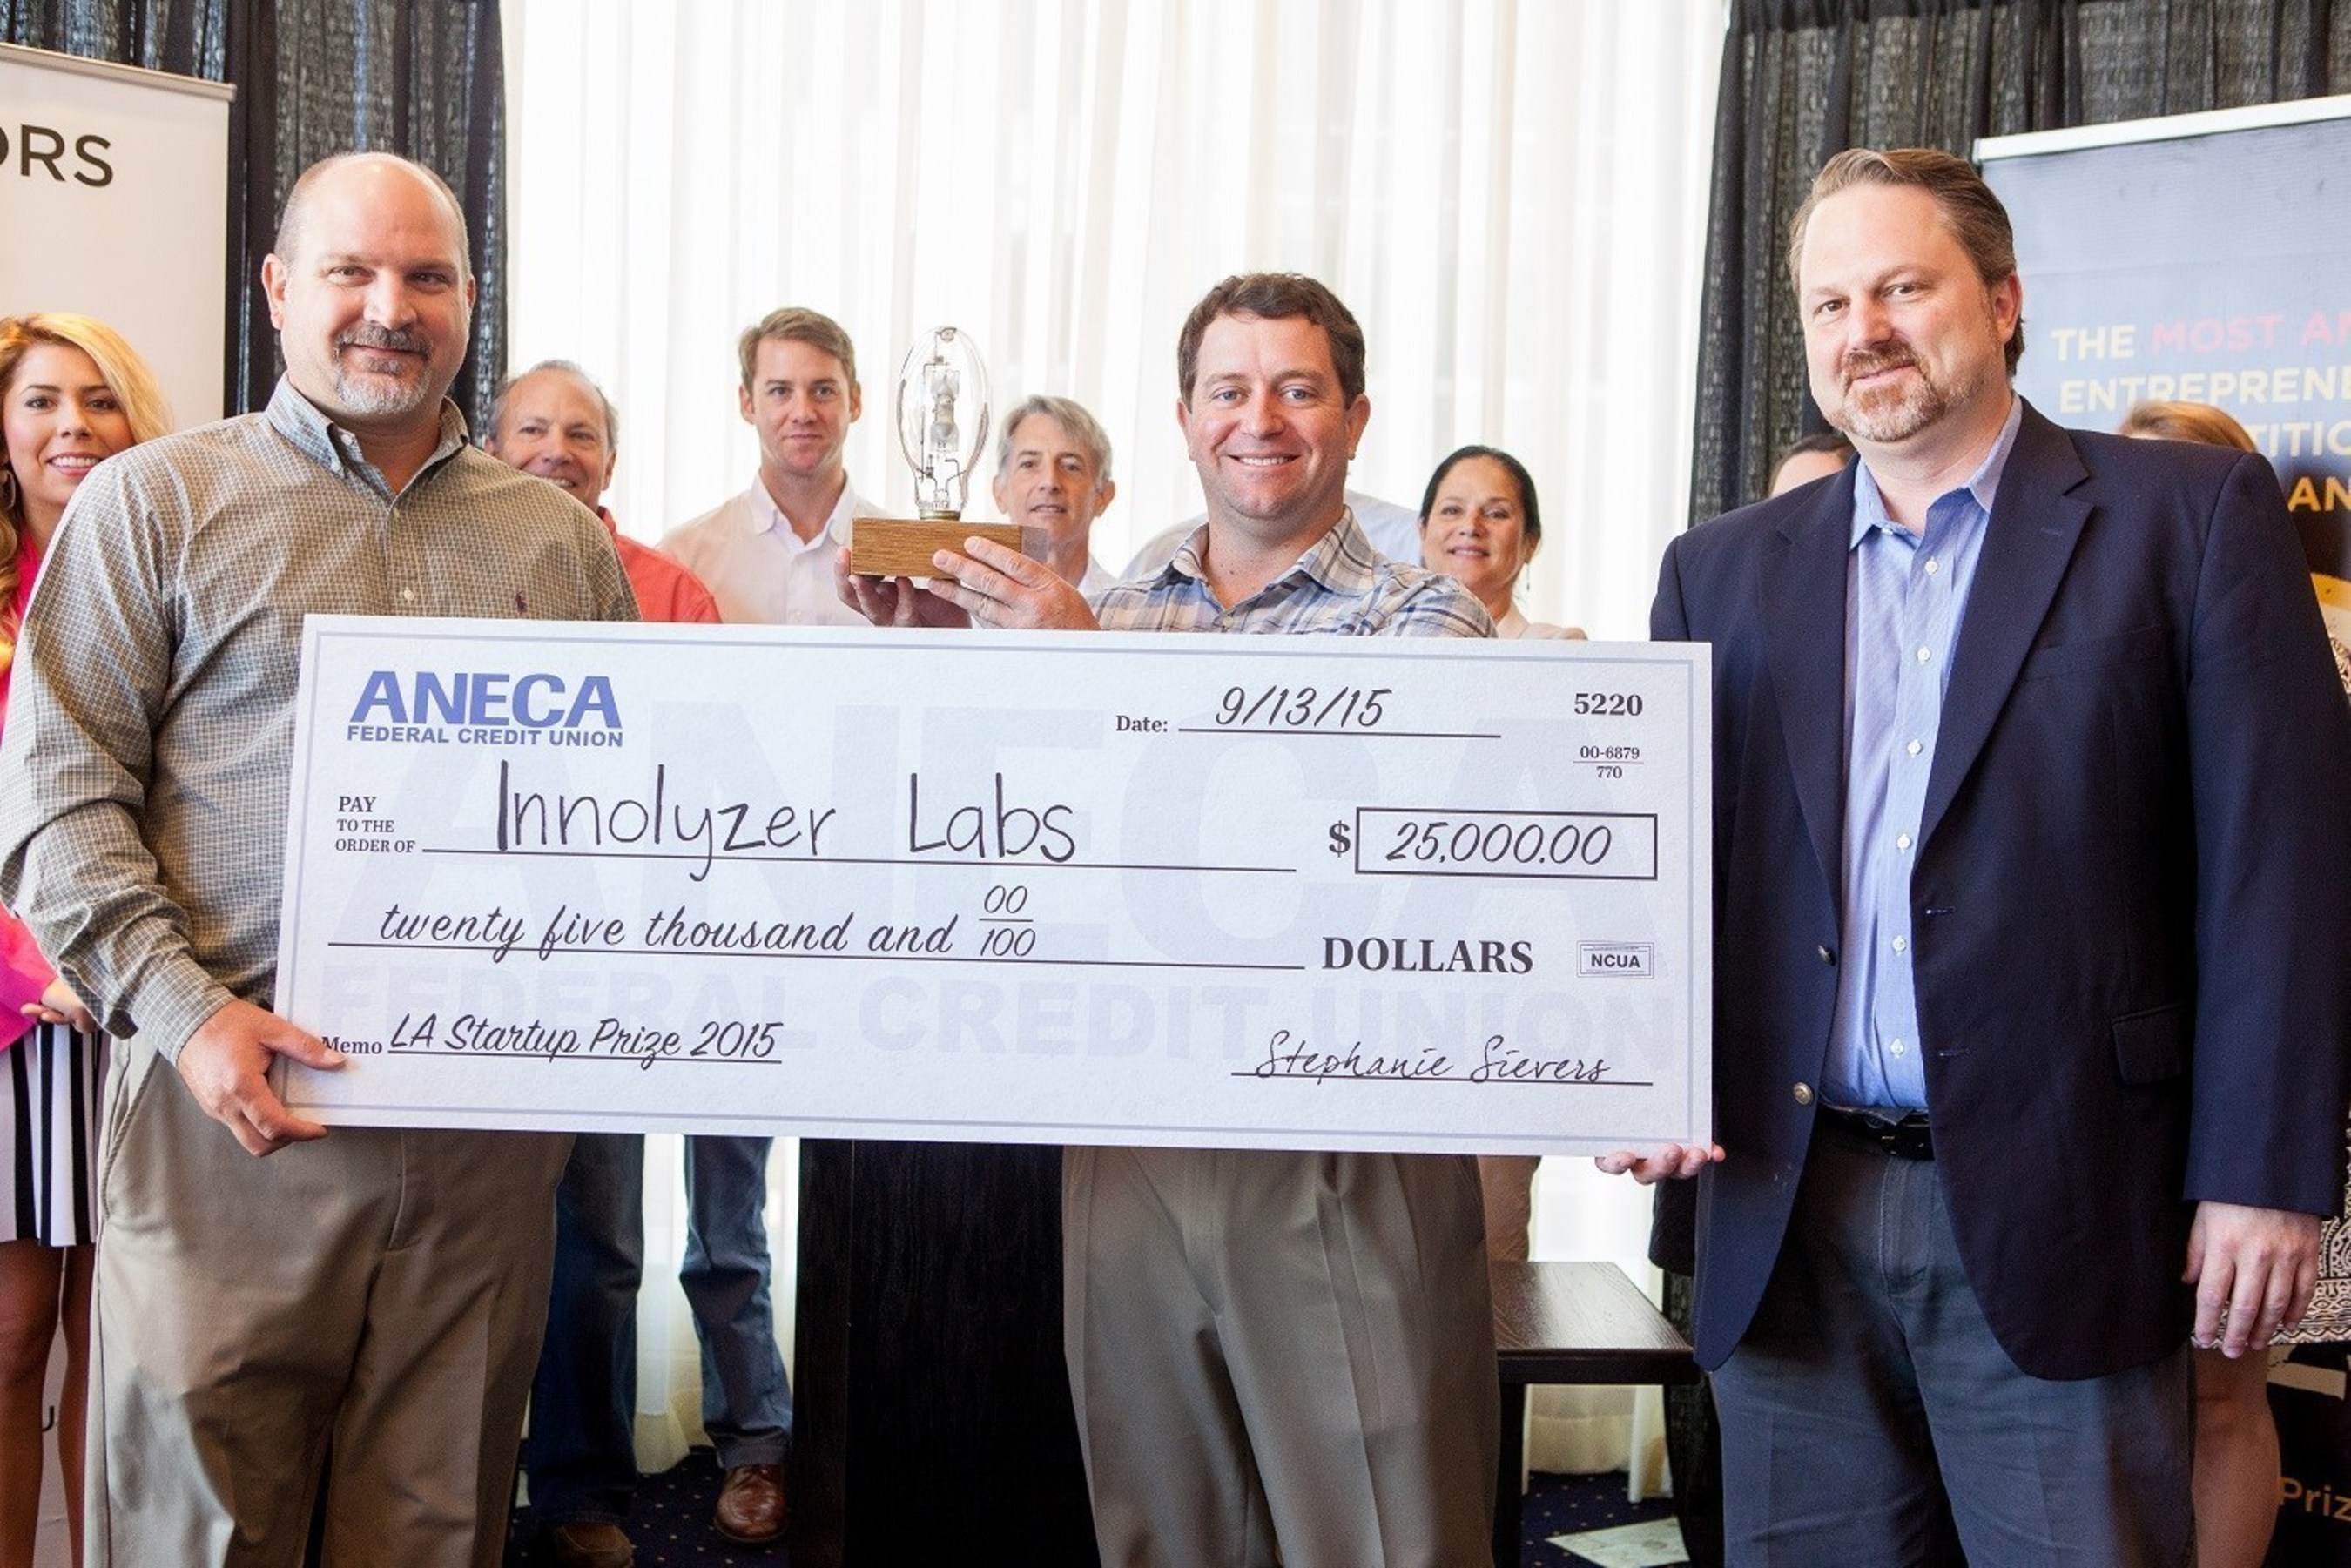 The 2015 Startup Prize gives away big check to Innolyzer Labs.